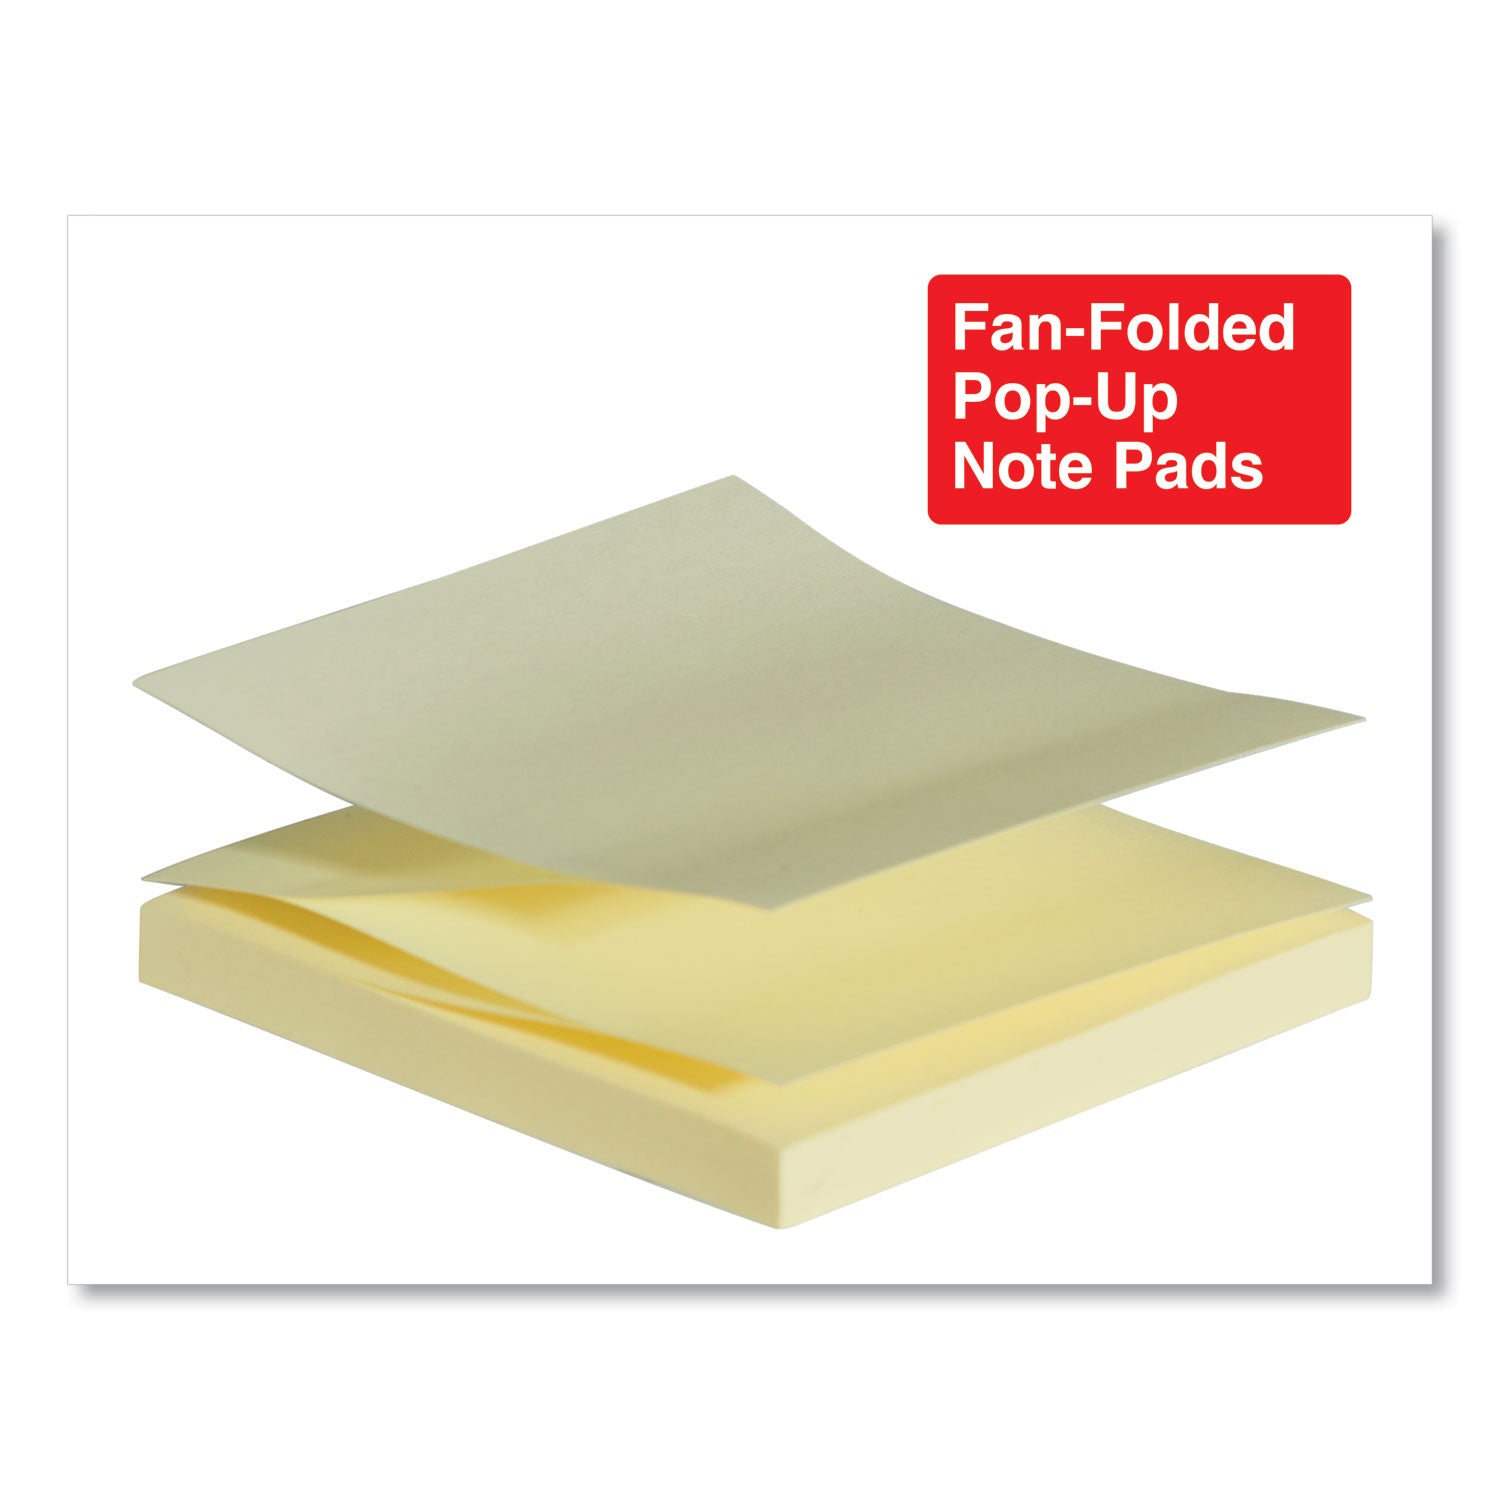 Fan-Folded Self-Stick Pop-Up Note Pads, 3" x 3", Assorted Pastel Colors, 100 Sheets/Pad, 12 Pads/Pack - 